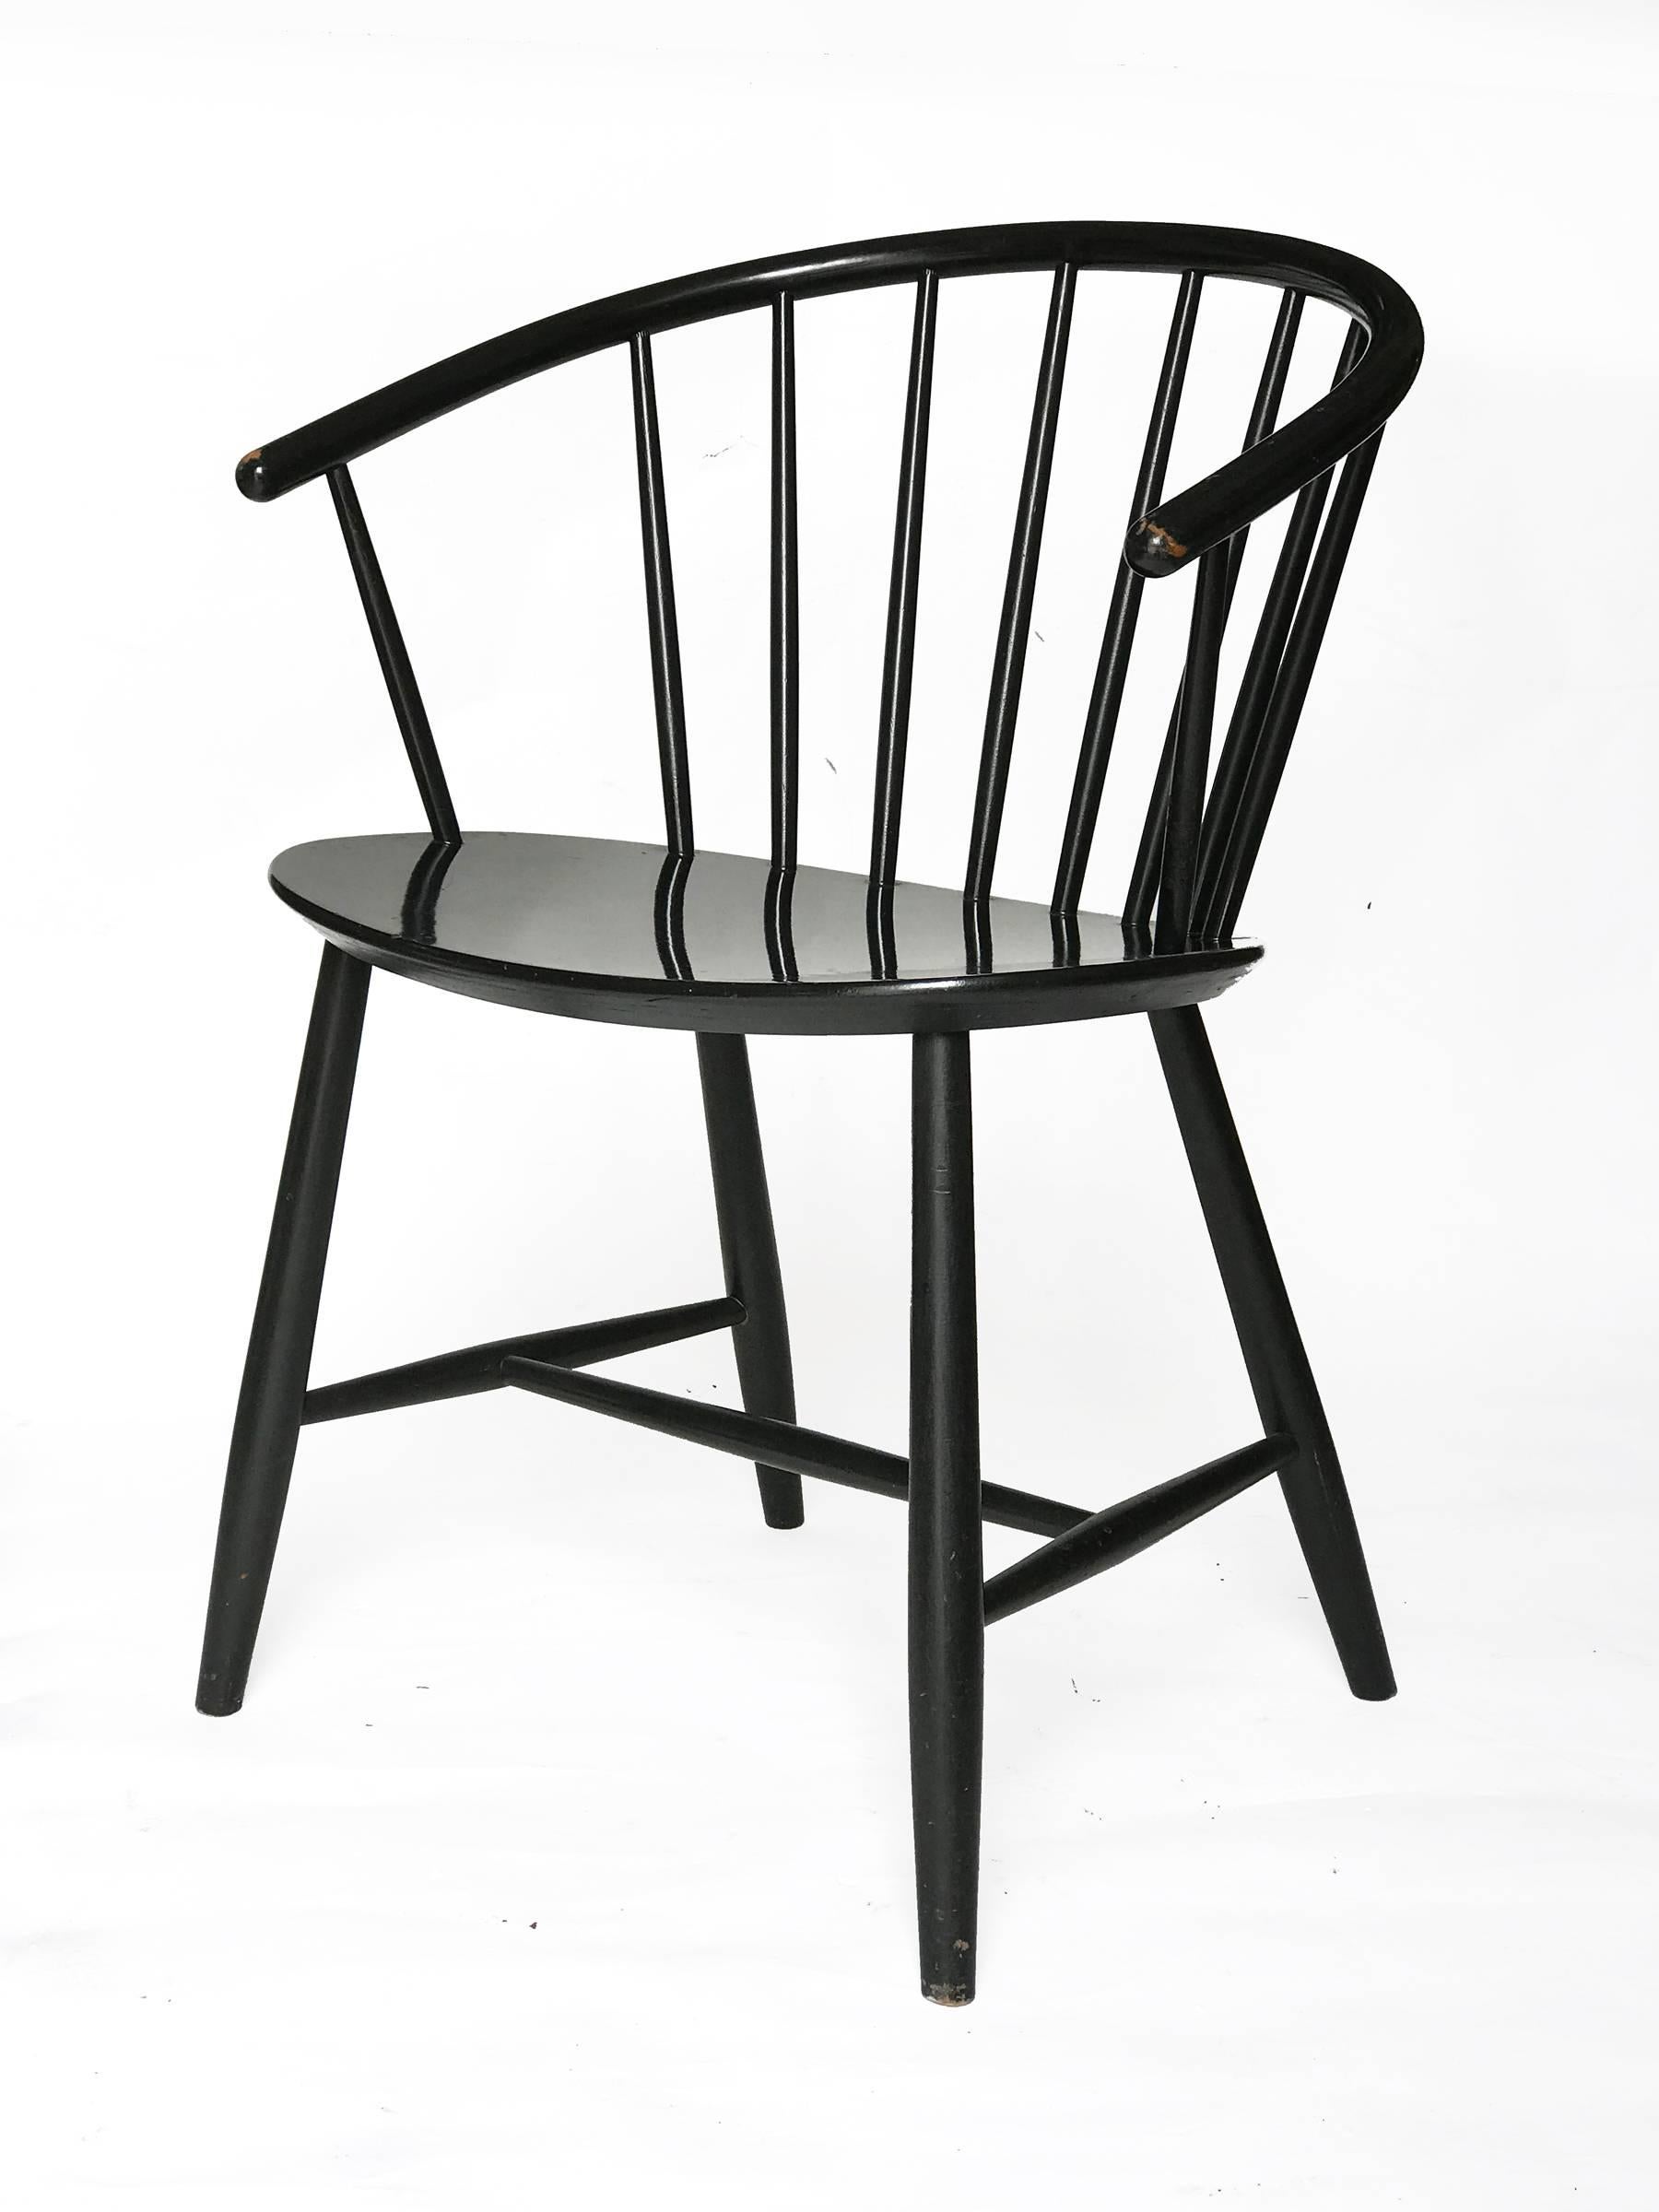 Mid-20th Century J64 Chair by Ejvind Johansson for FDB Mobler, 1957 For Sale